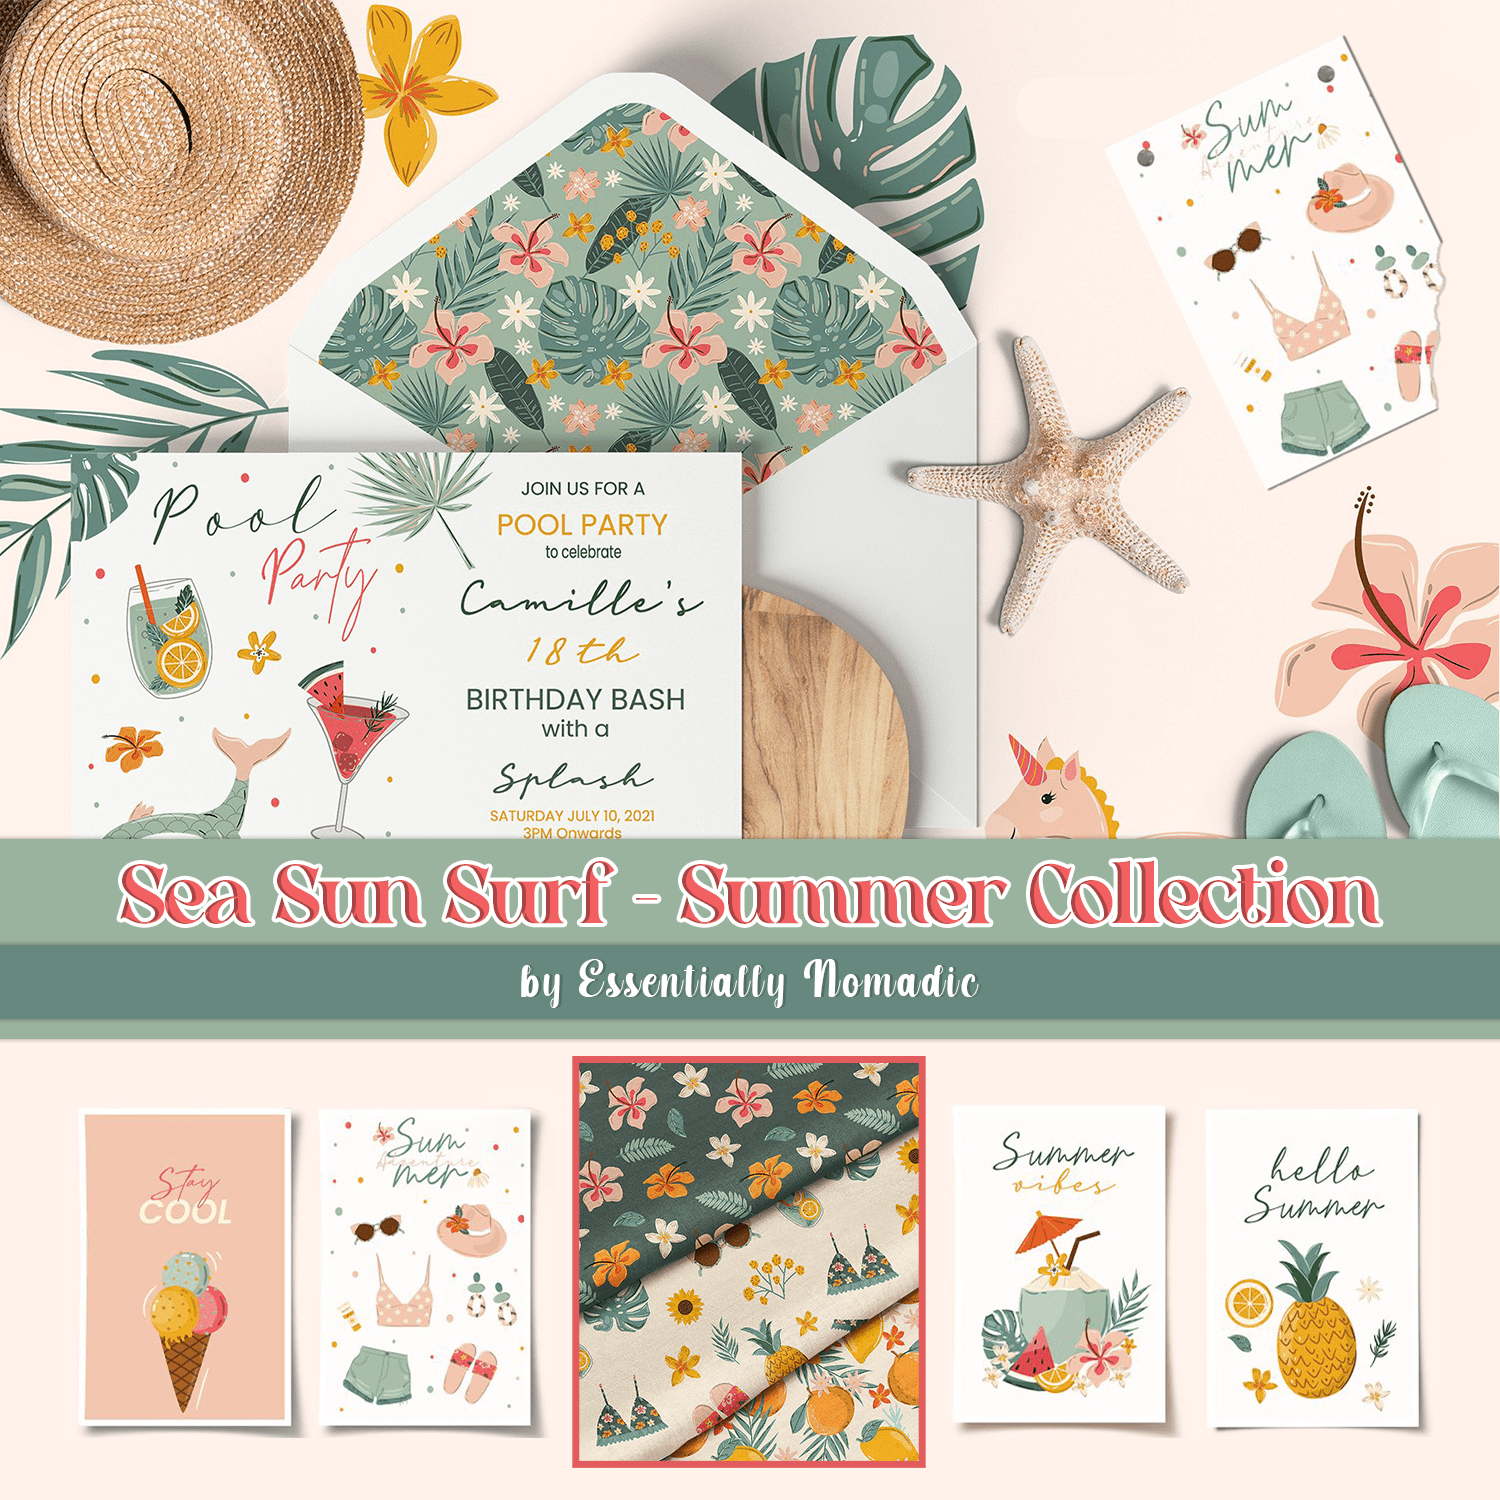 Sea Sun Surf - Summer Collection cover.